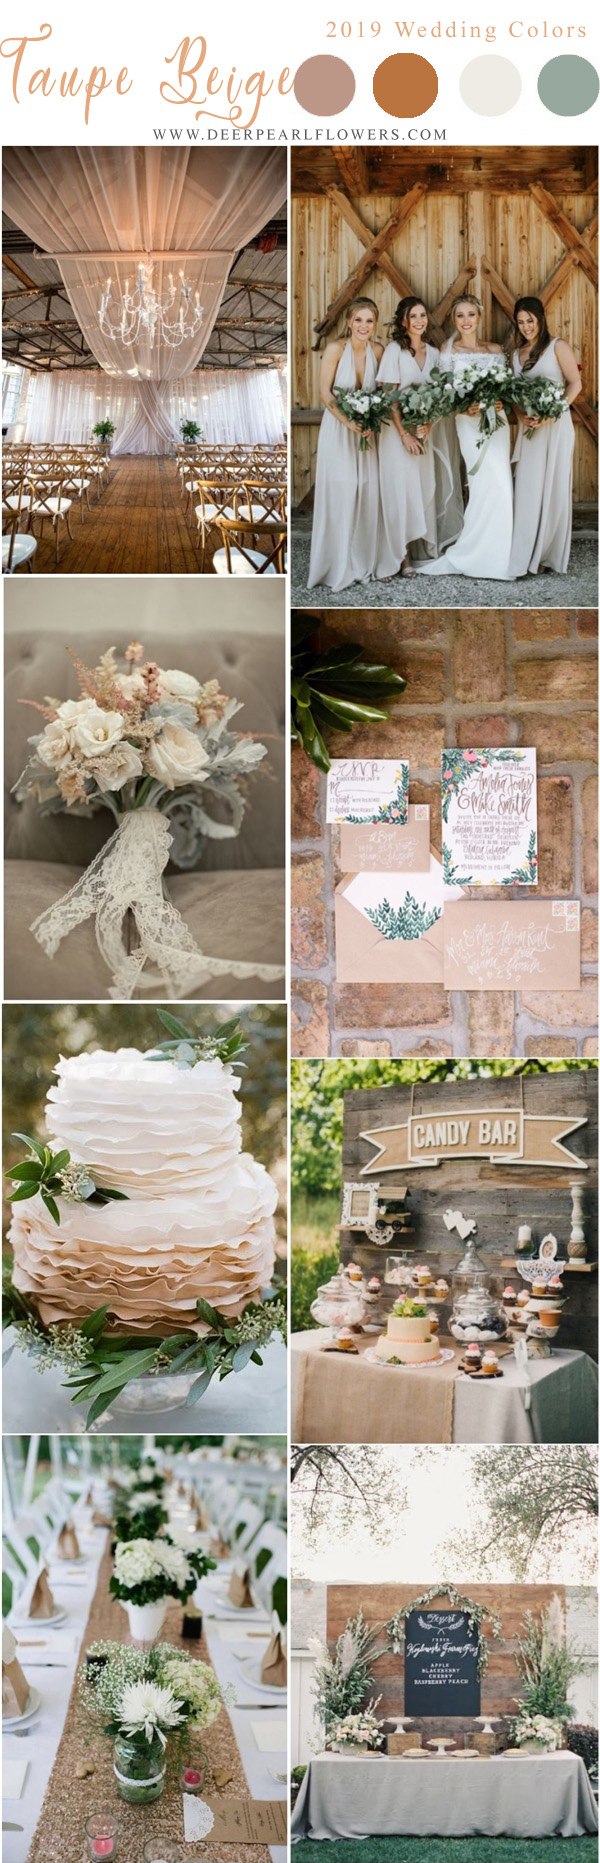 Warm taupe, beige and greenery wedding color ideas